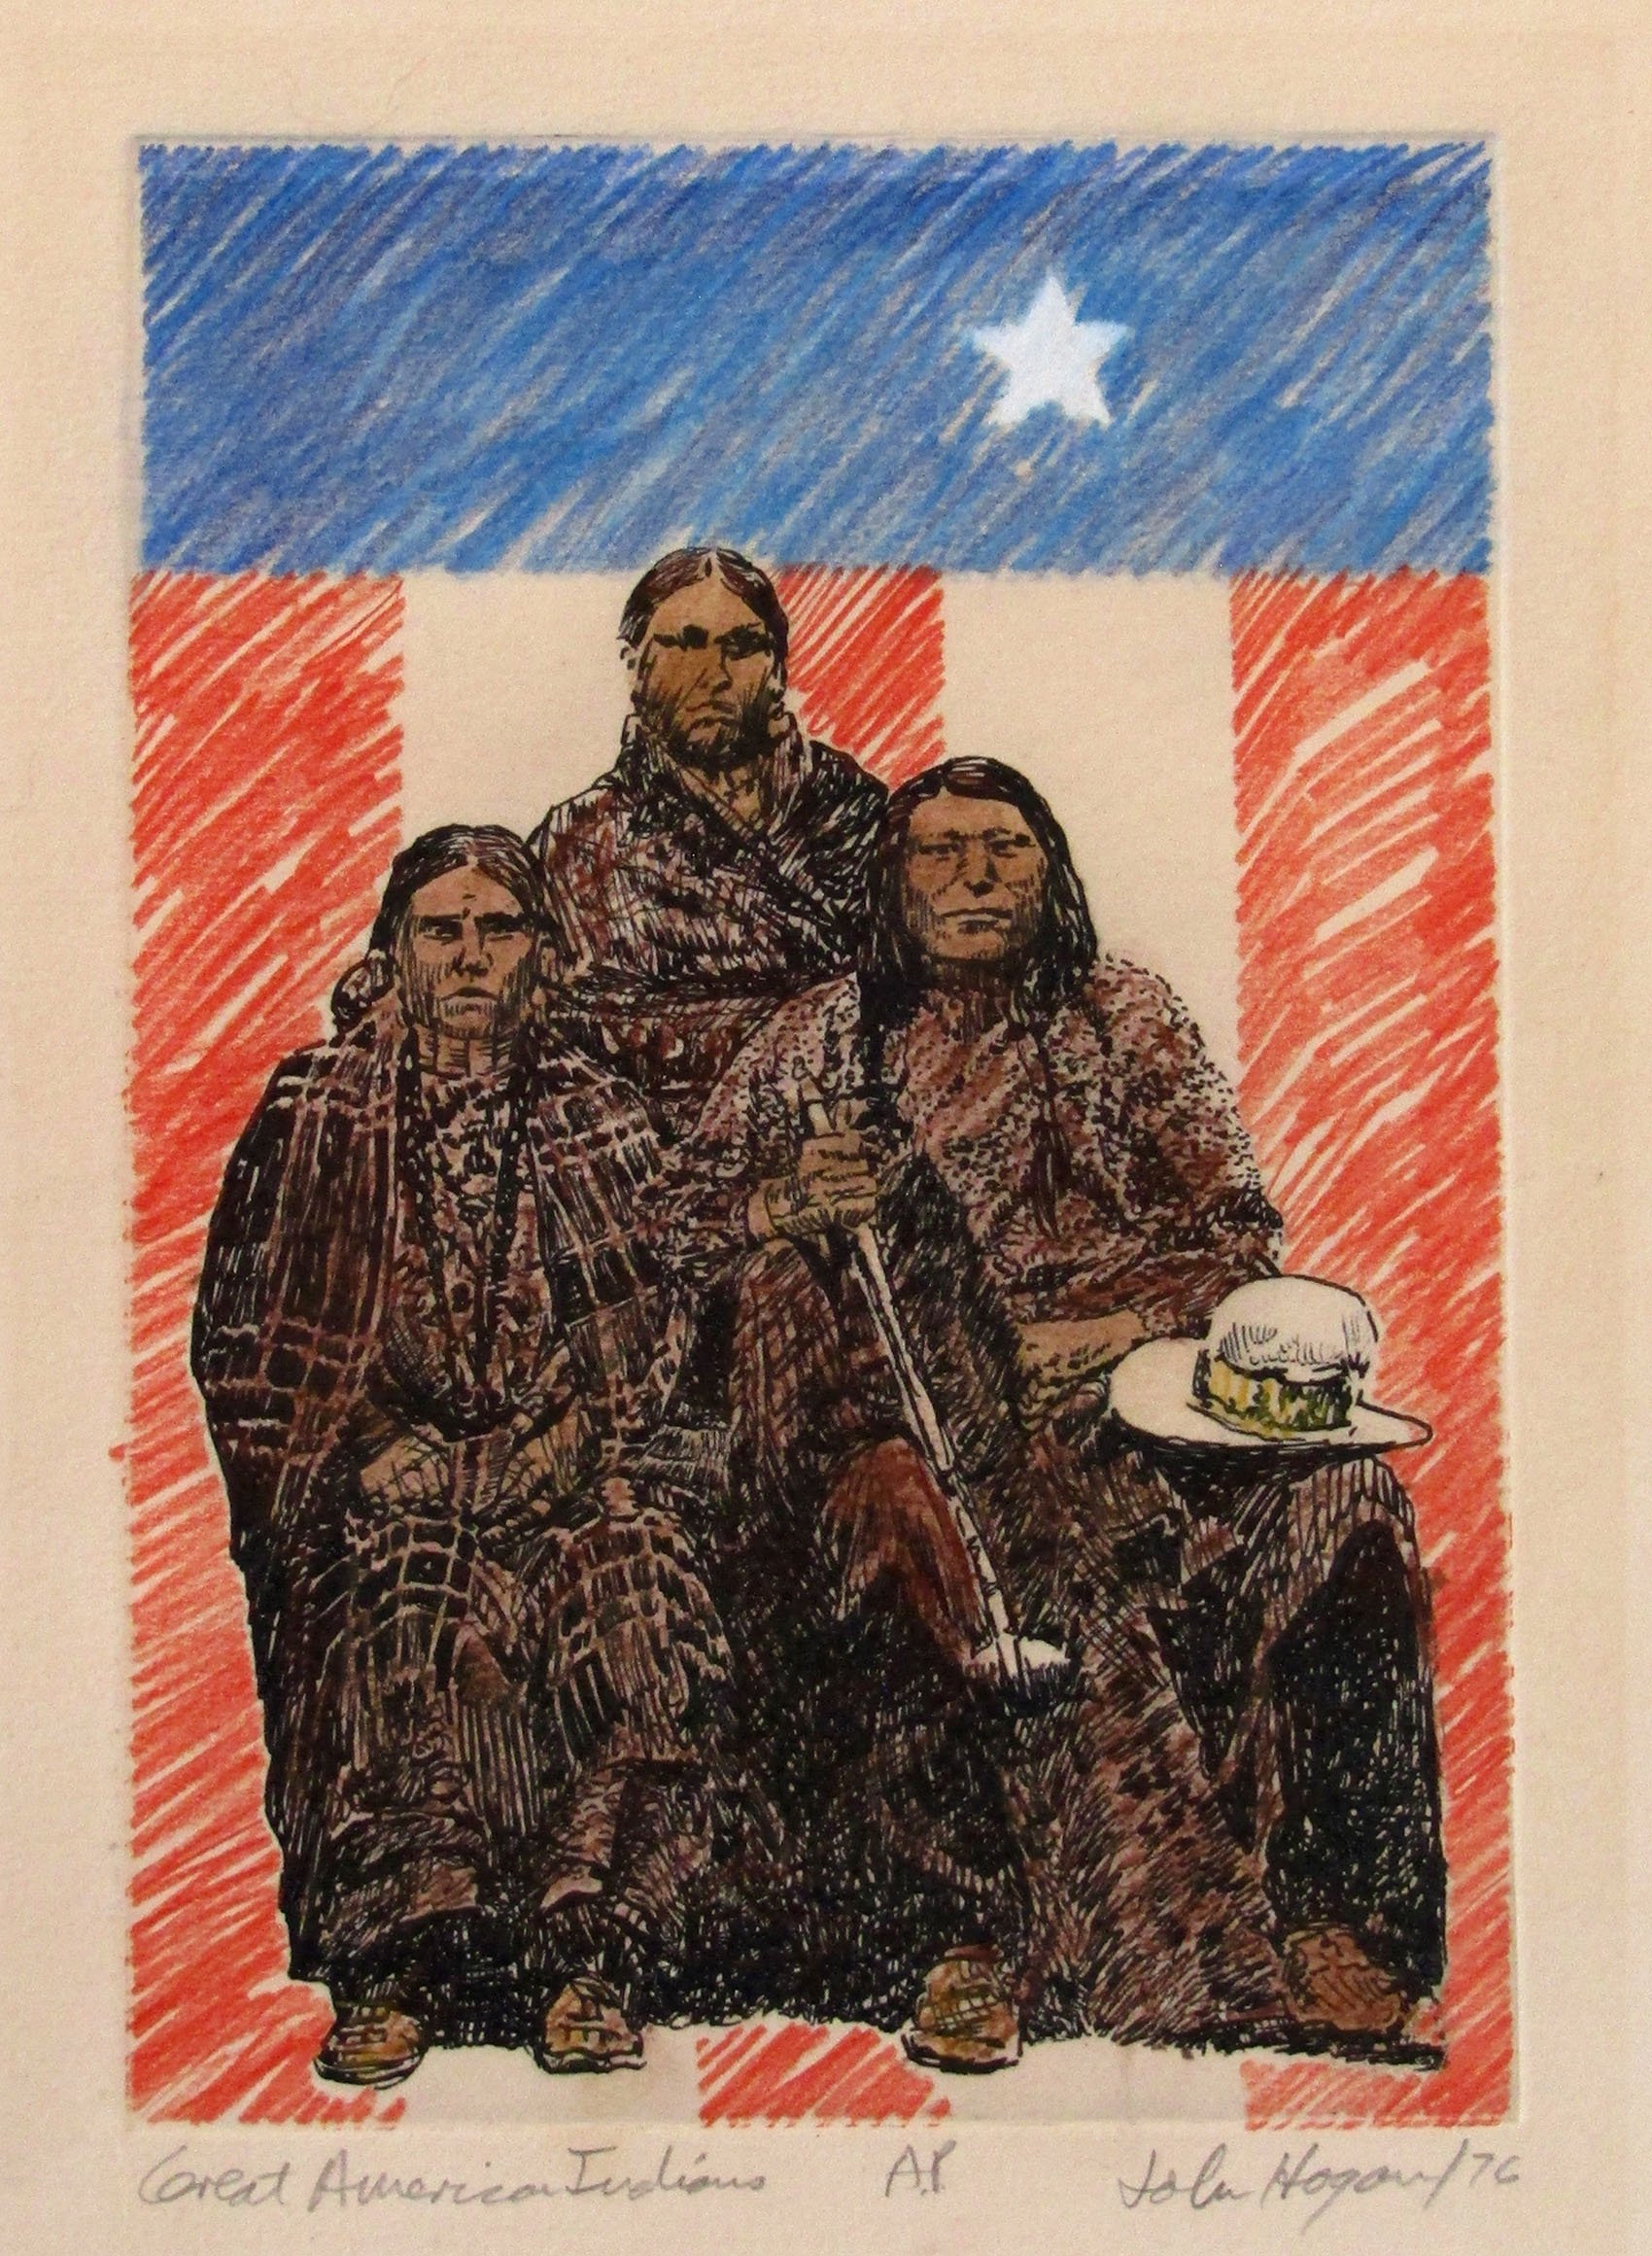 Great American Indians